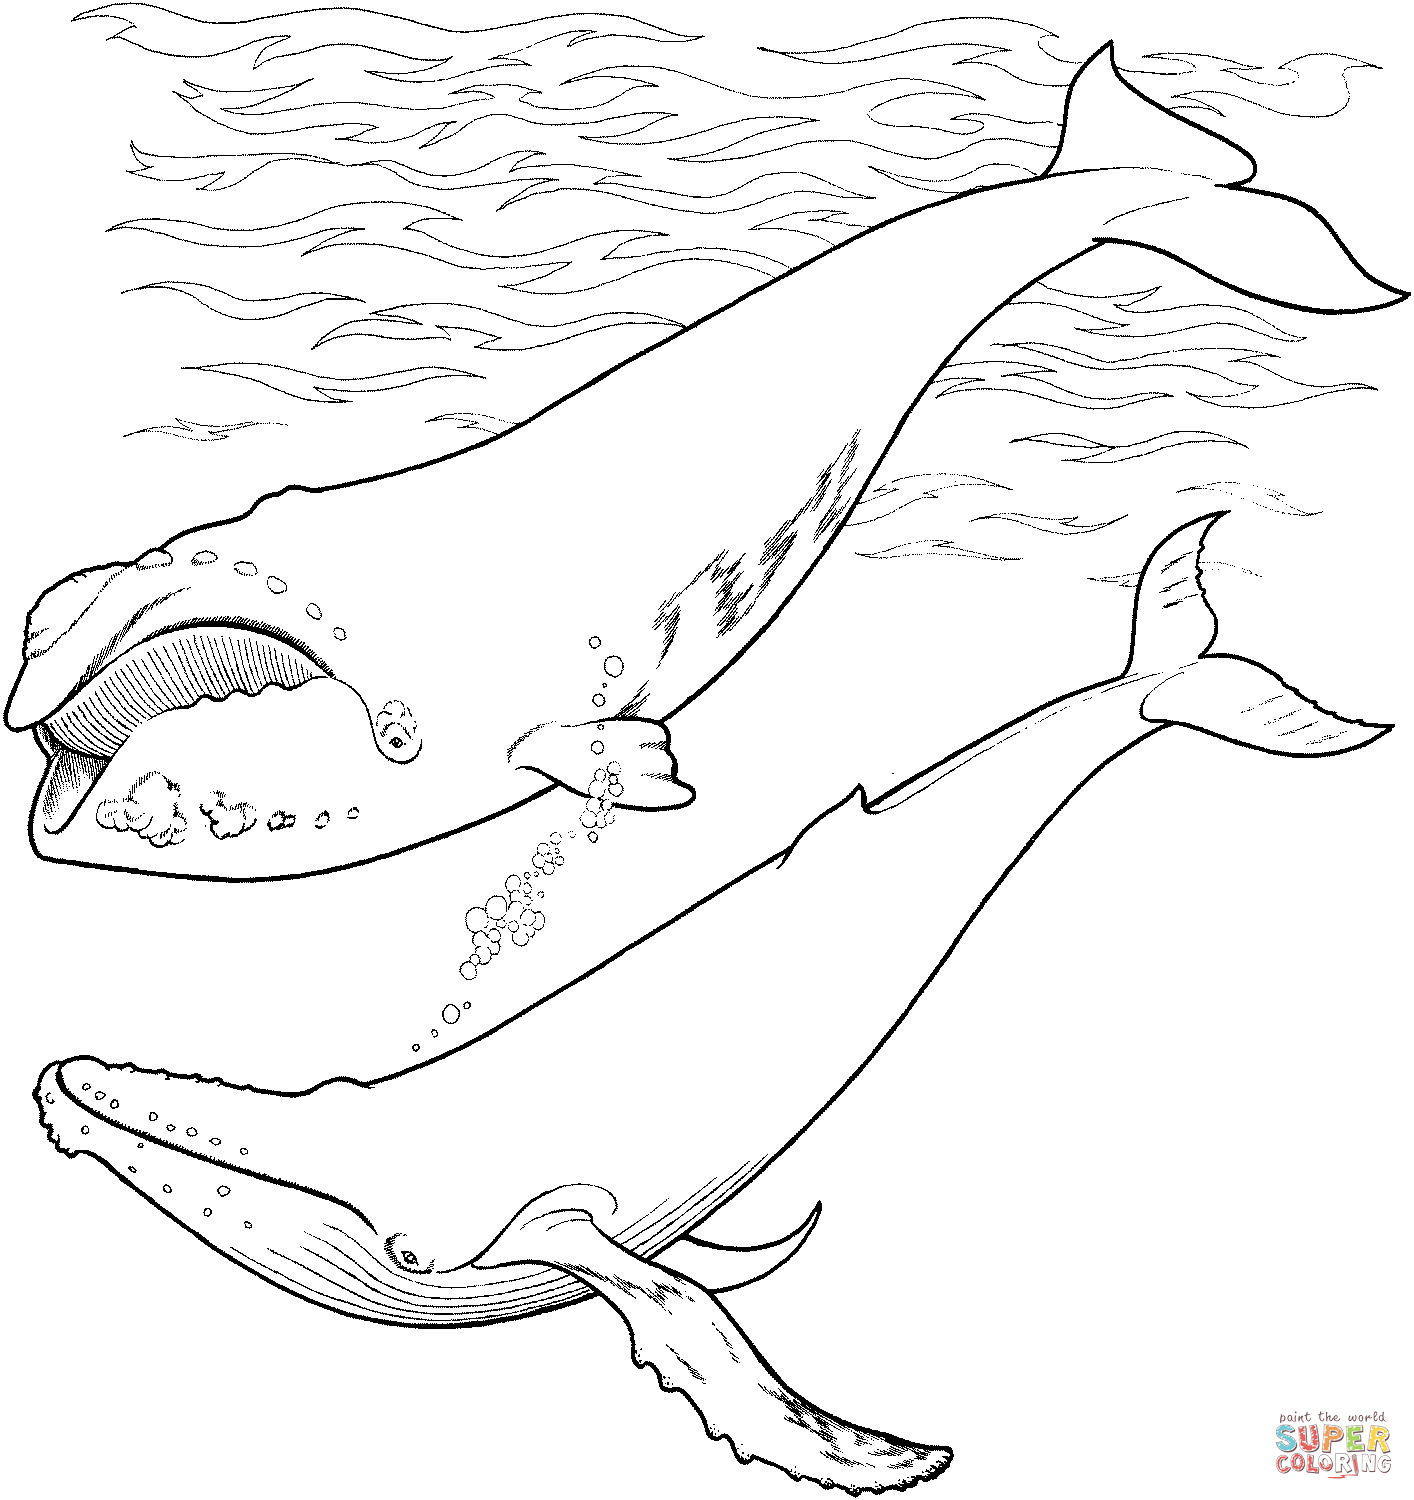 humpback whale pictures to color humpback whale coloring page free whale coloring pages whale to humpback pictures color 